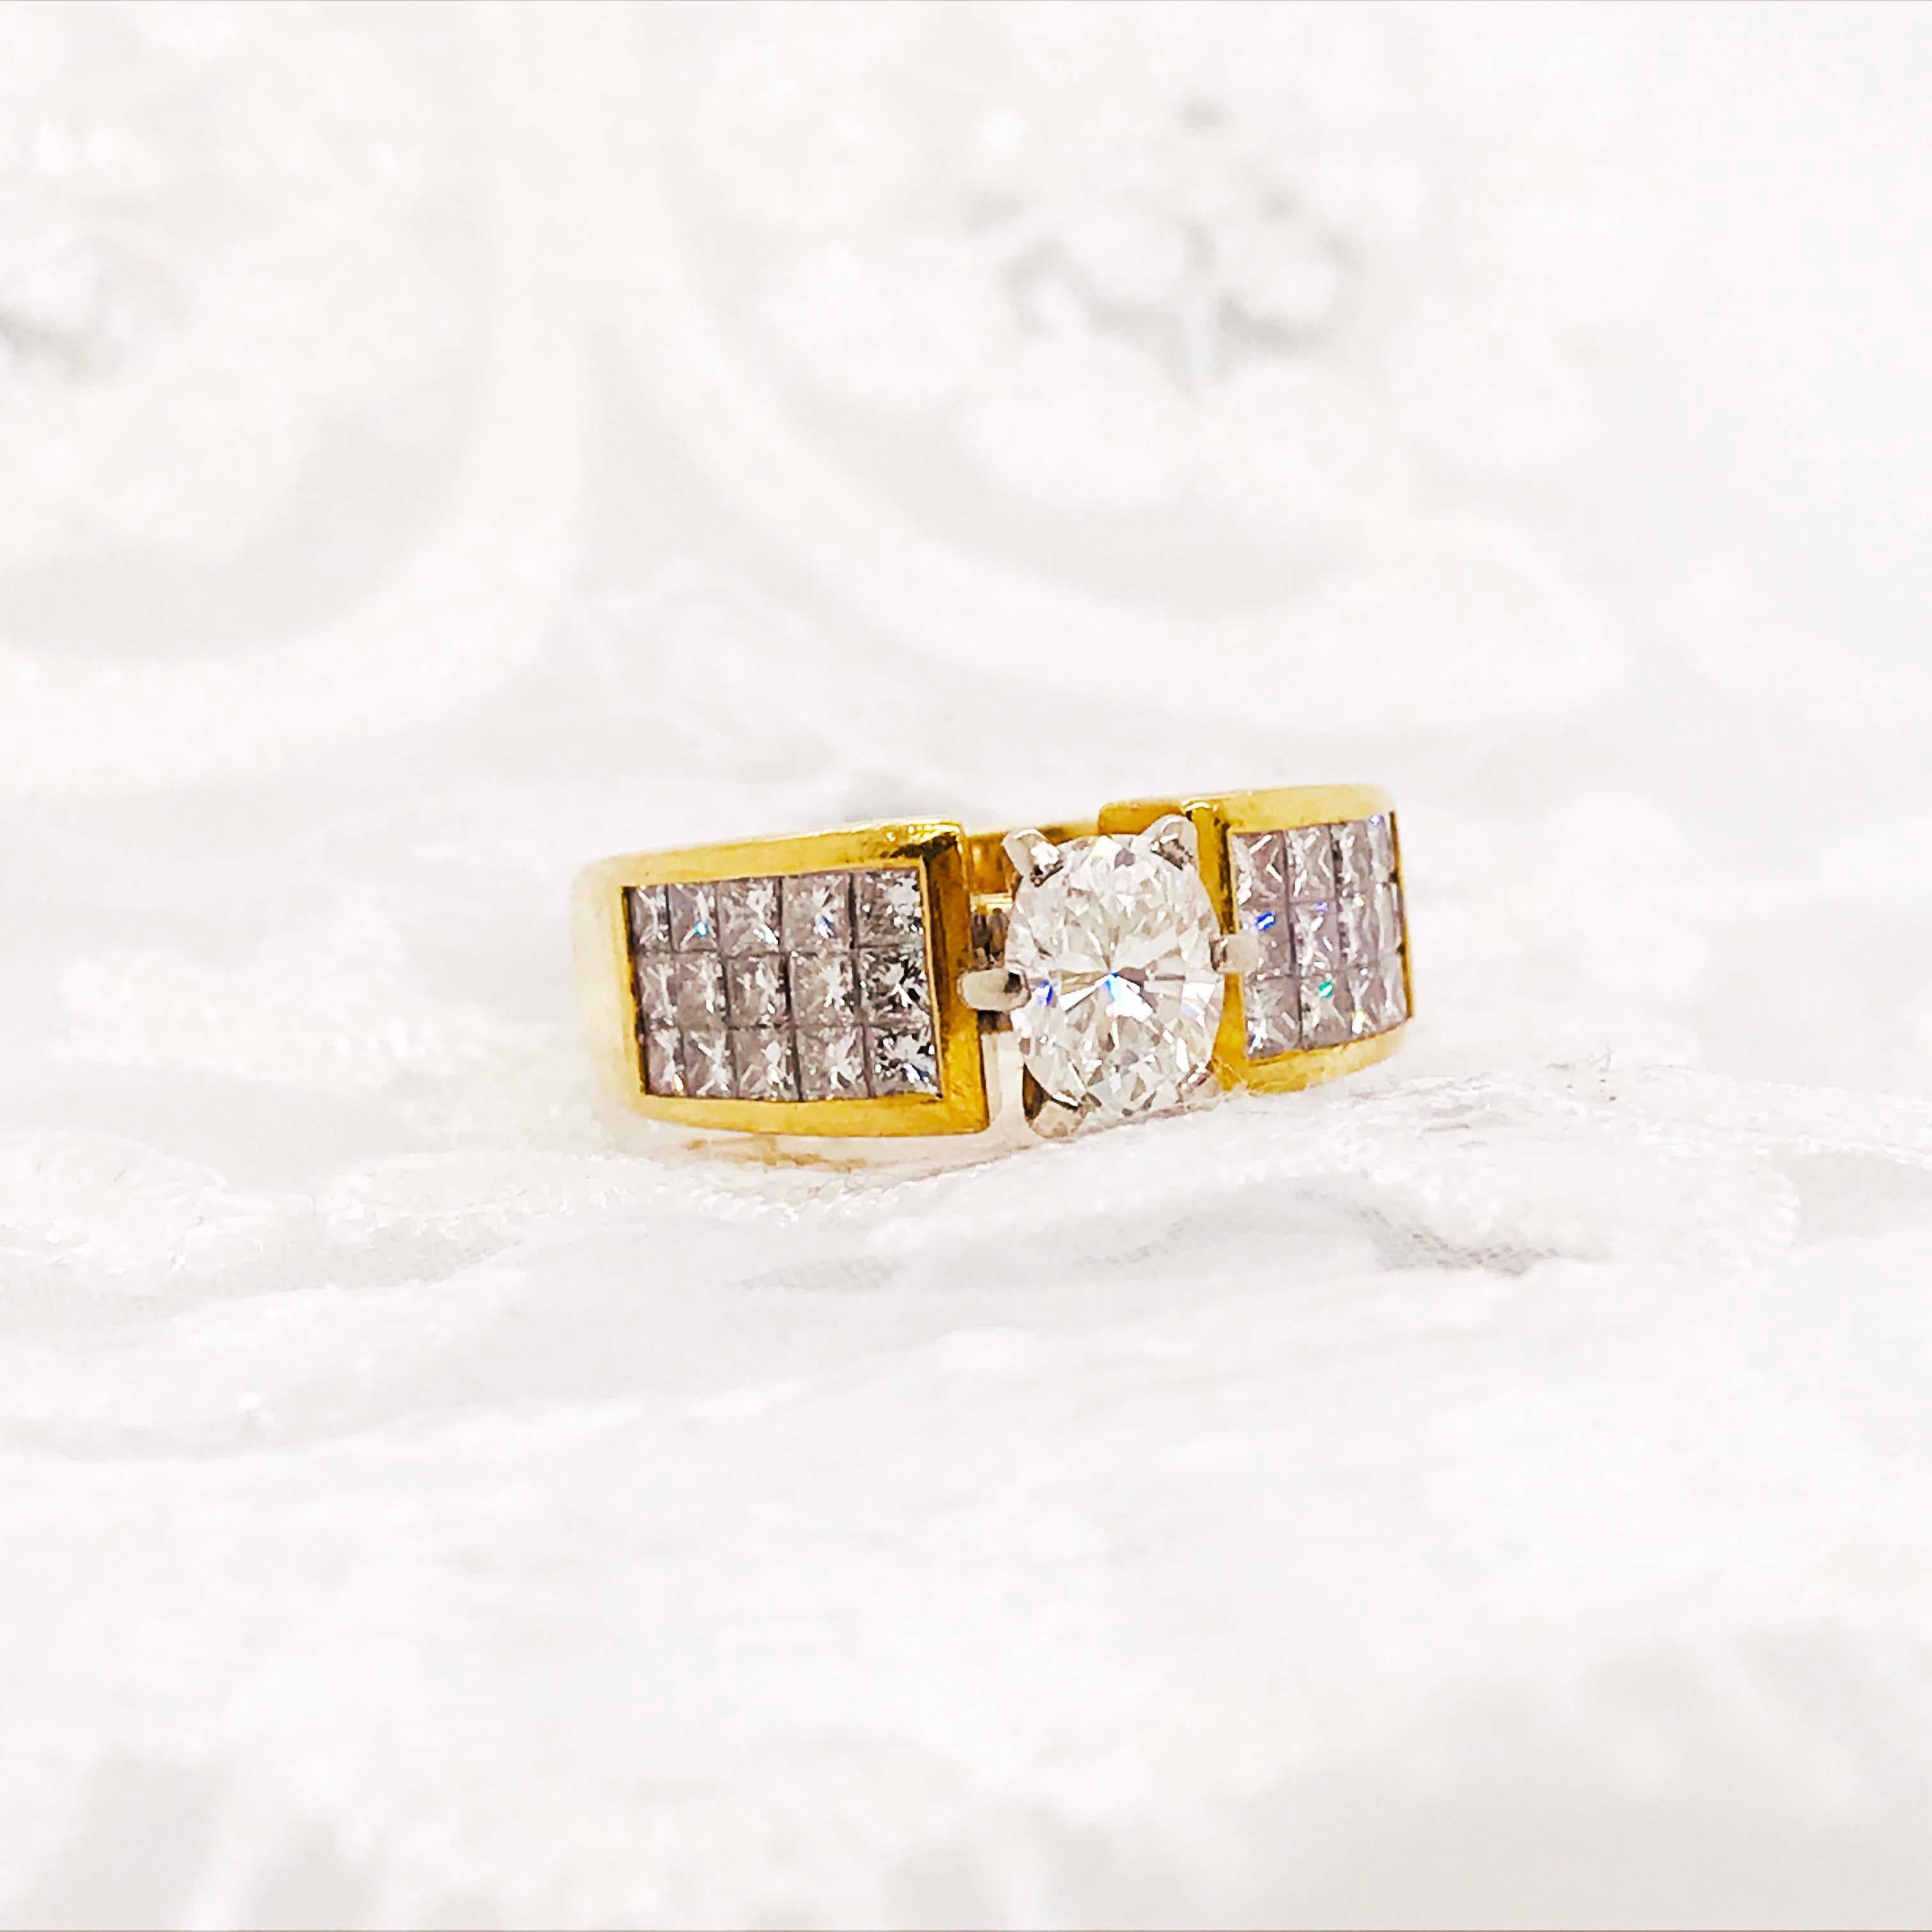 Oval Diamond Ring, 1.50 Carat with Princess Cut Diamond Band, 18 Karat Gold In Excellent Condition For Sale In Austin, TX